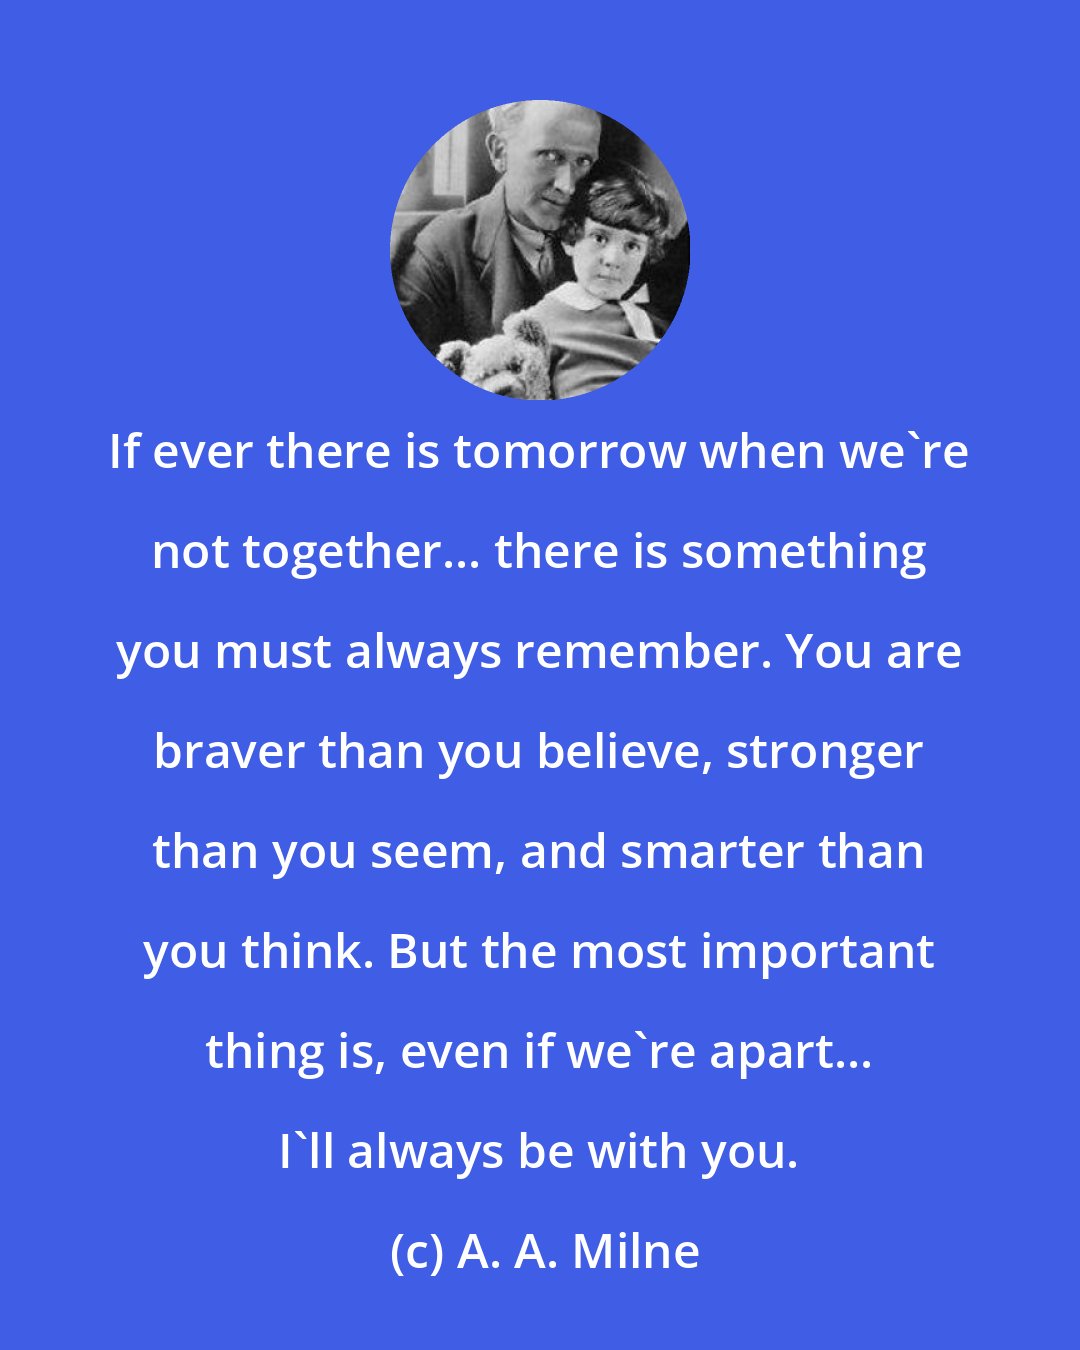 A. A. Milne: If ever there is tomorrow when we're not together... there is something you must always remember. You are braver than you believe, stronger than you seem, and smarter than you think. But the most important thing is, even if we're apart... I'll always be with you.